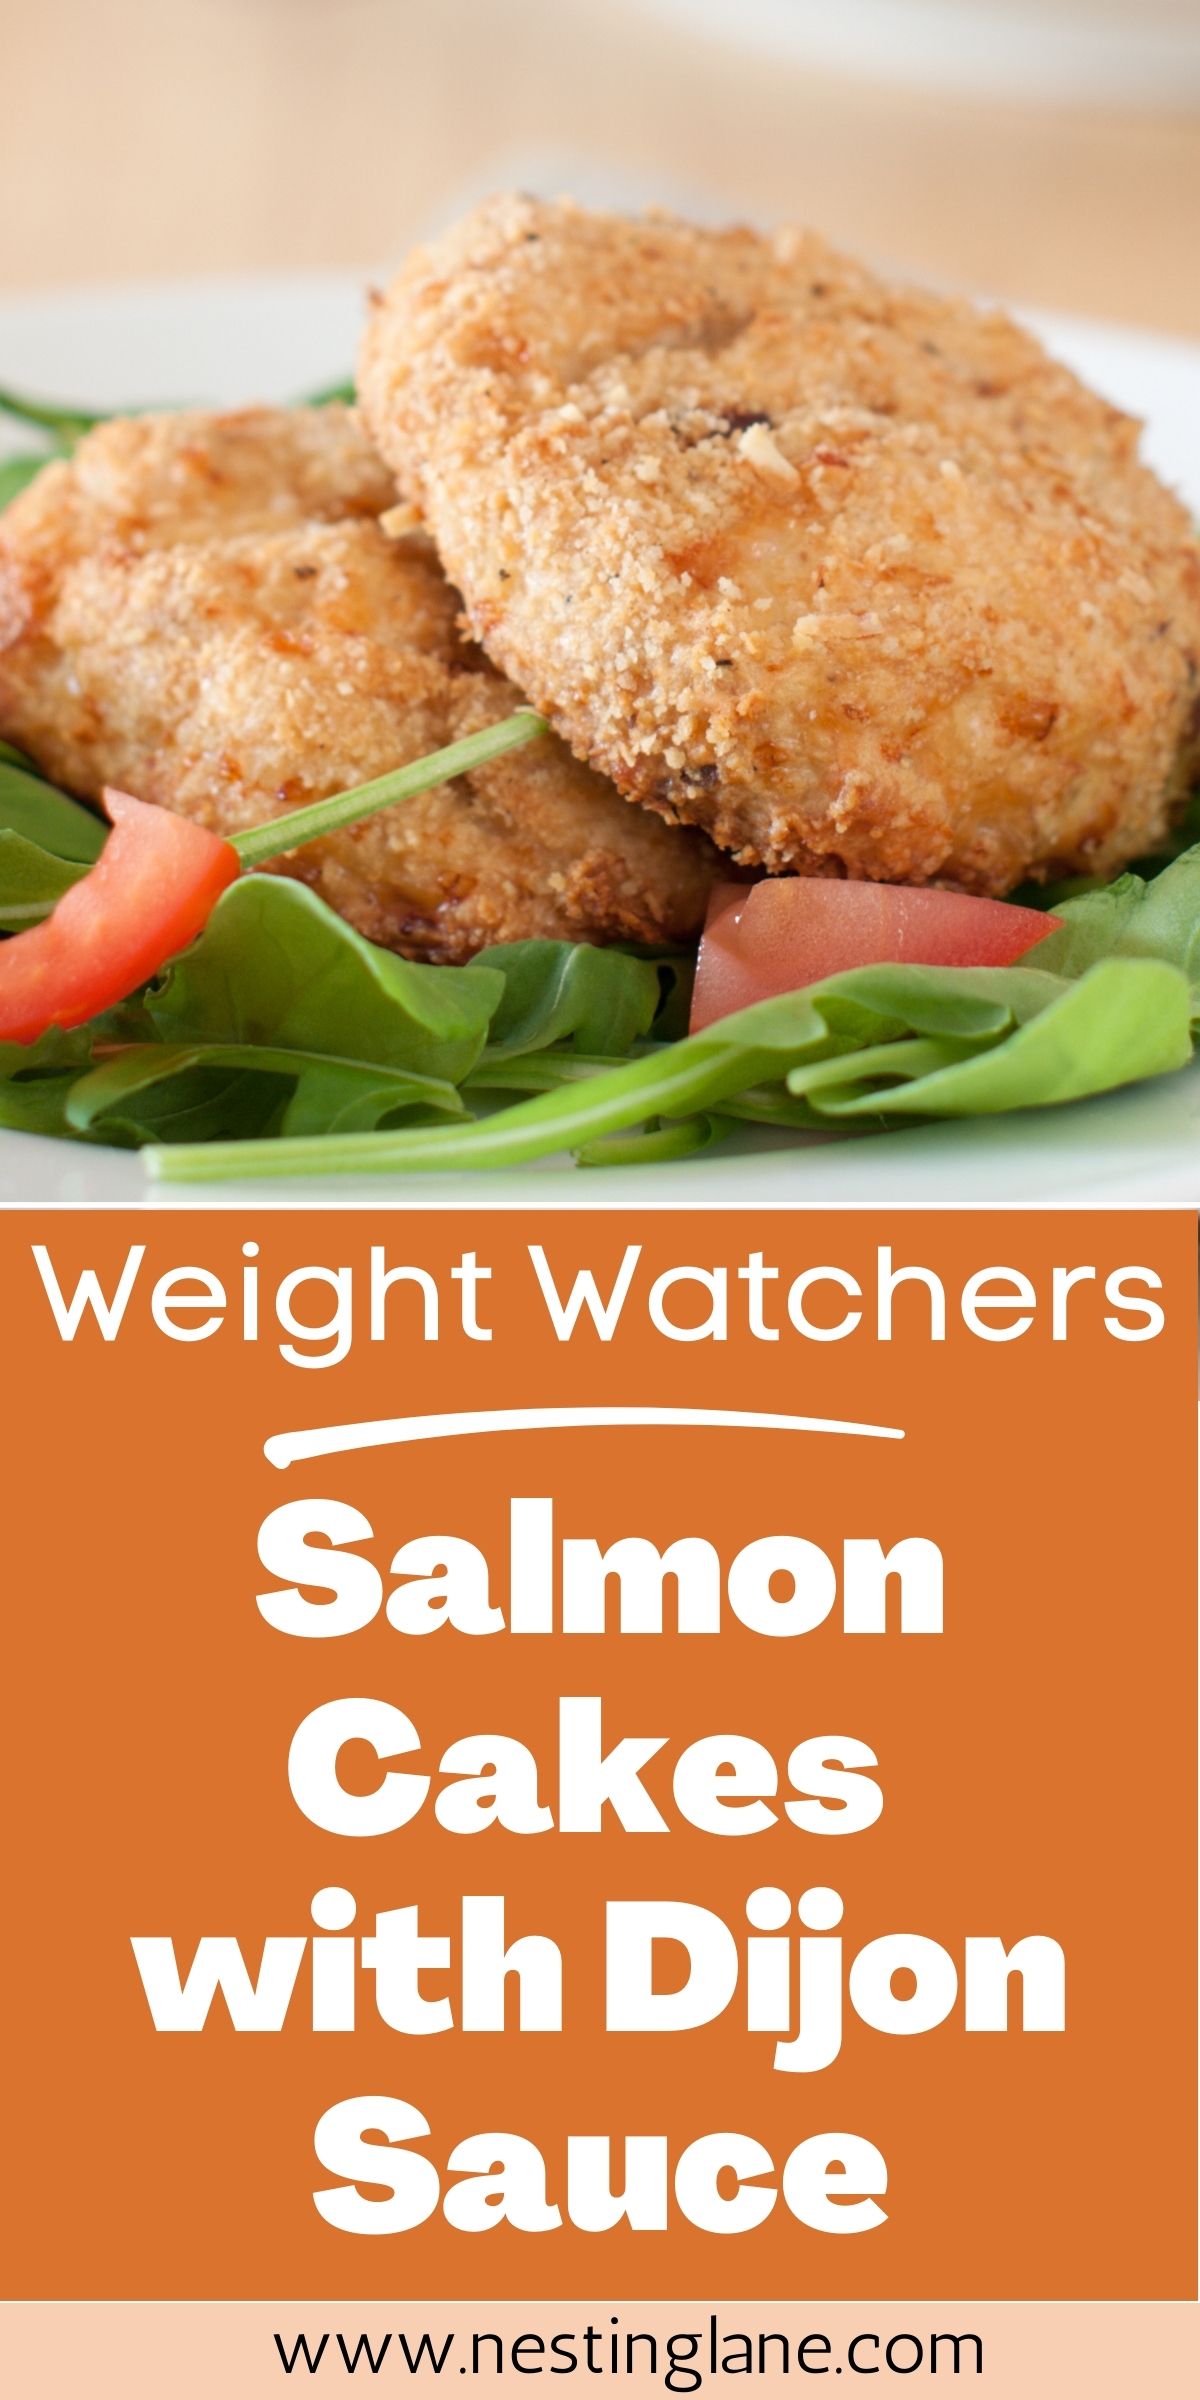 Graphic for Pinterest of Weight Watchers Salmon Cakes with Dijon Sauce Recipe.